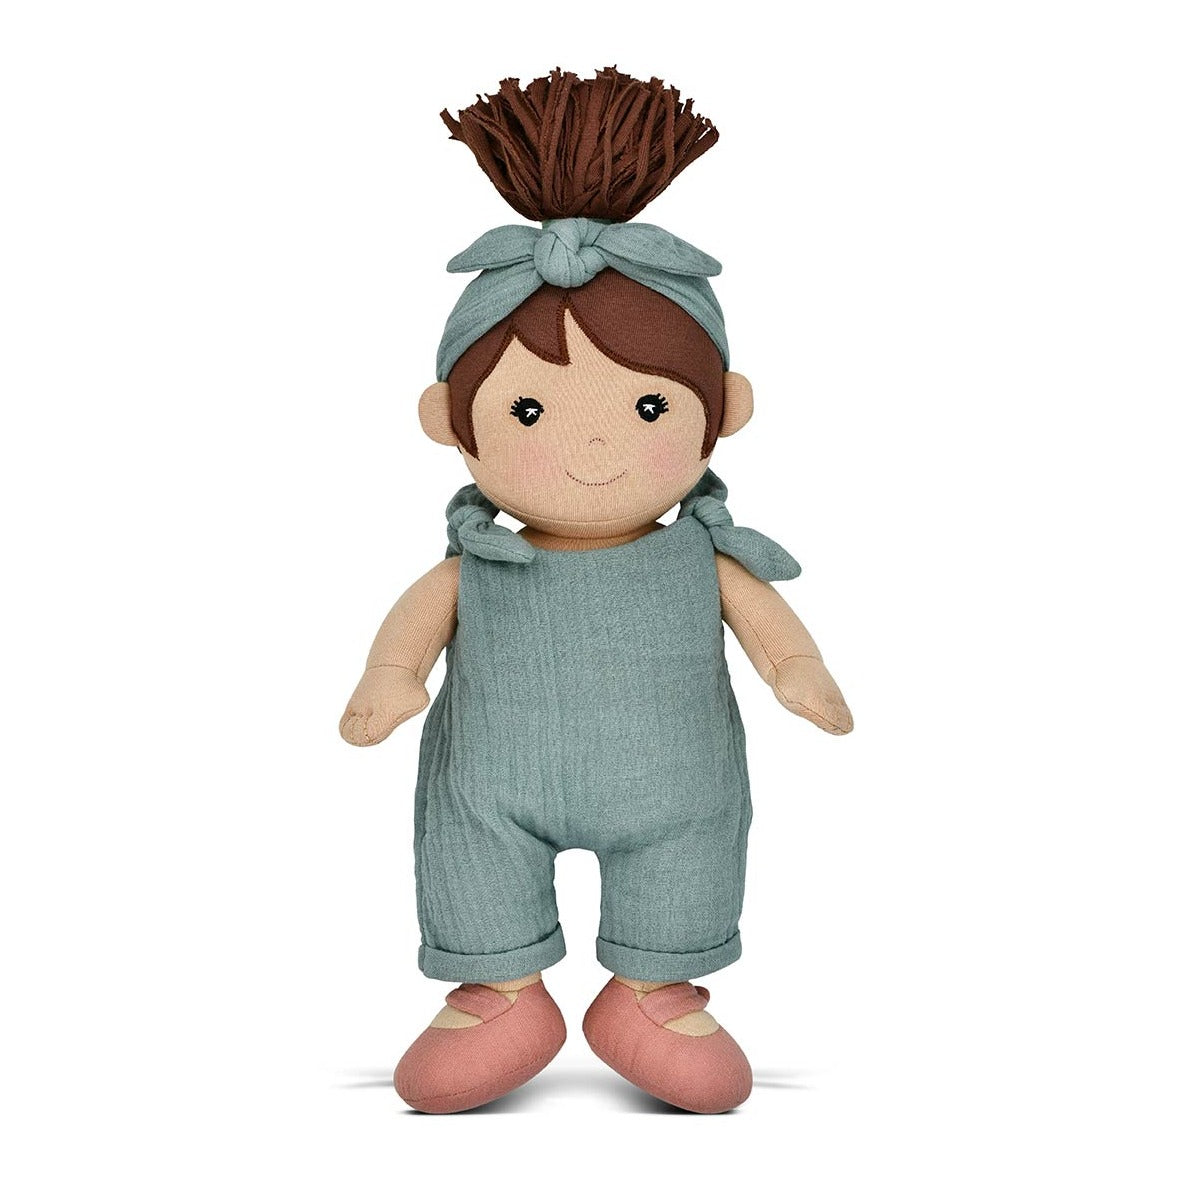 Apple Park soft toy doll - angus and dudley